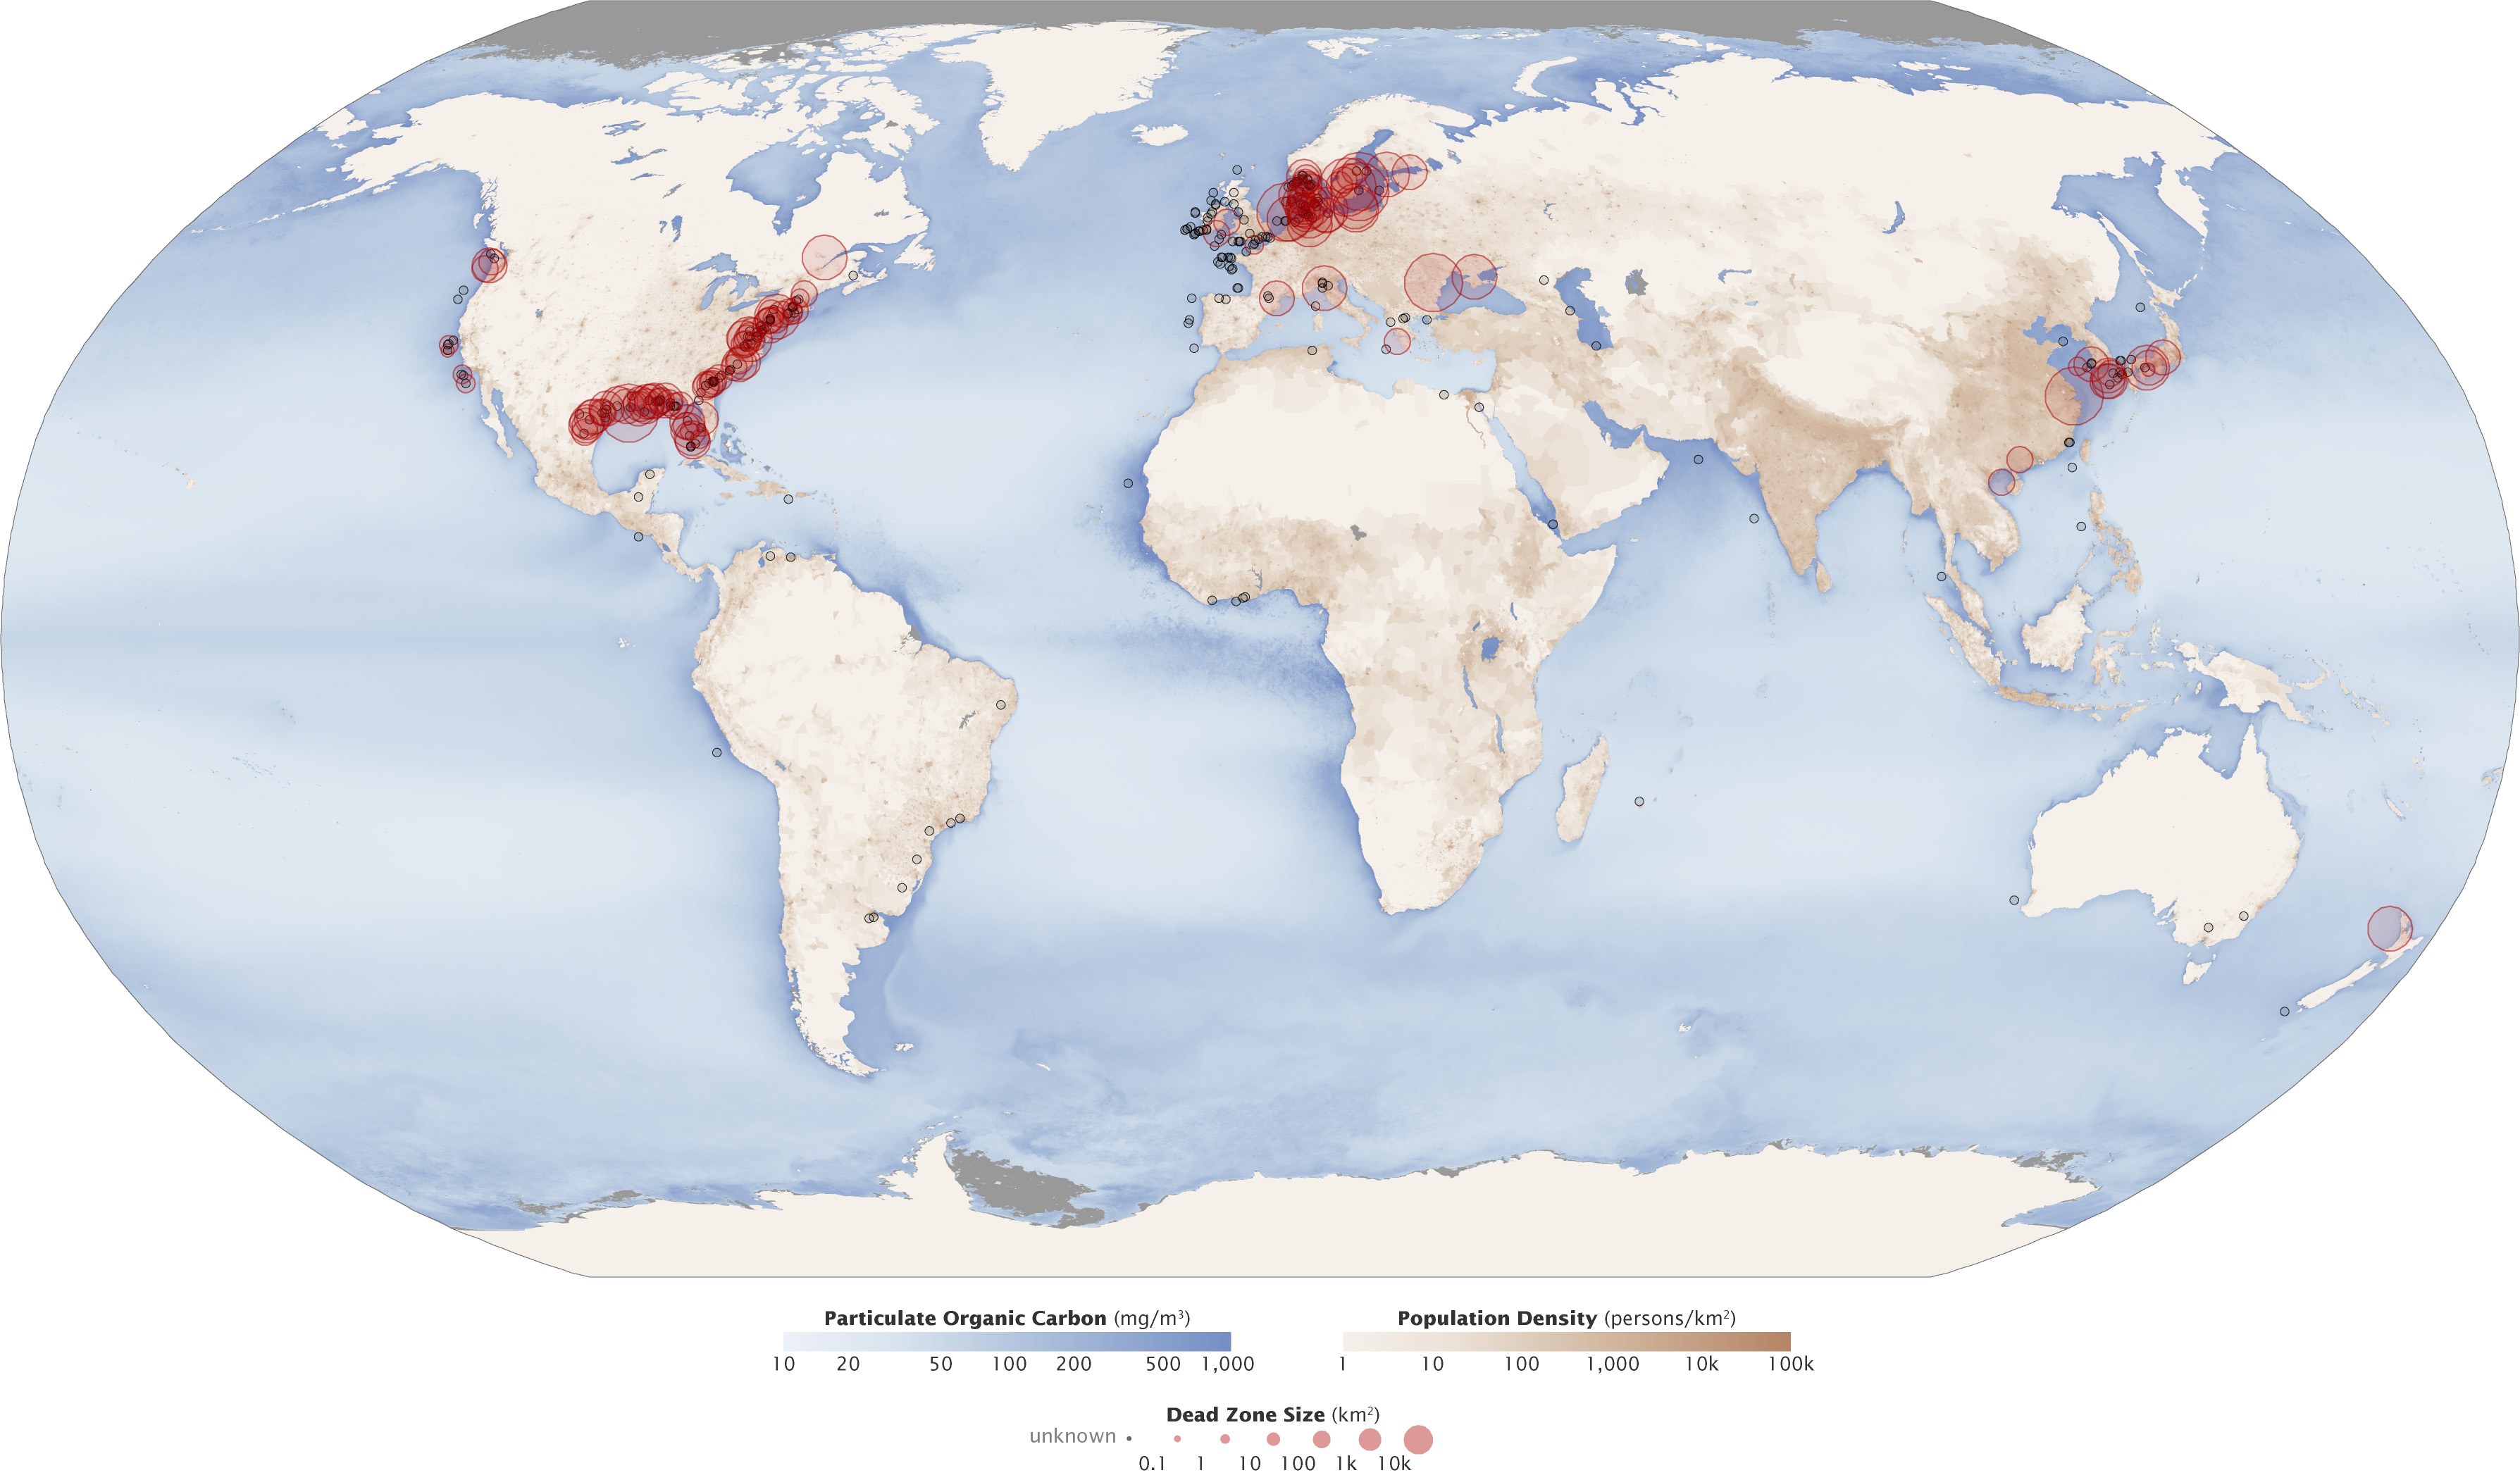 The size and number of marine dead zones